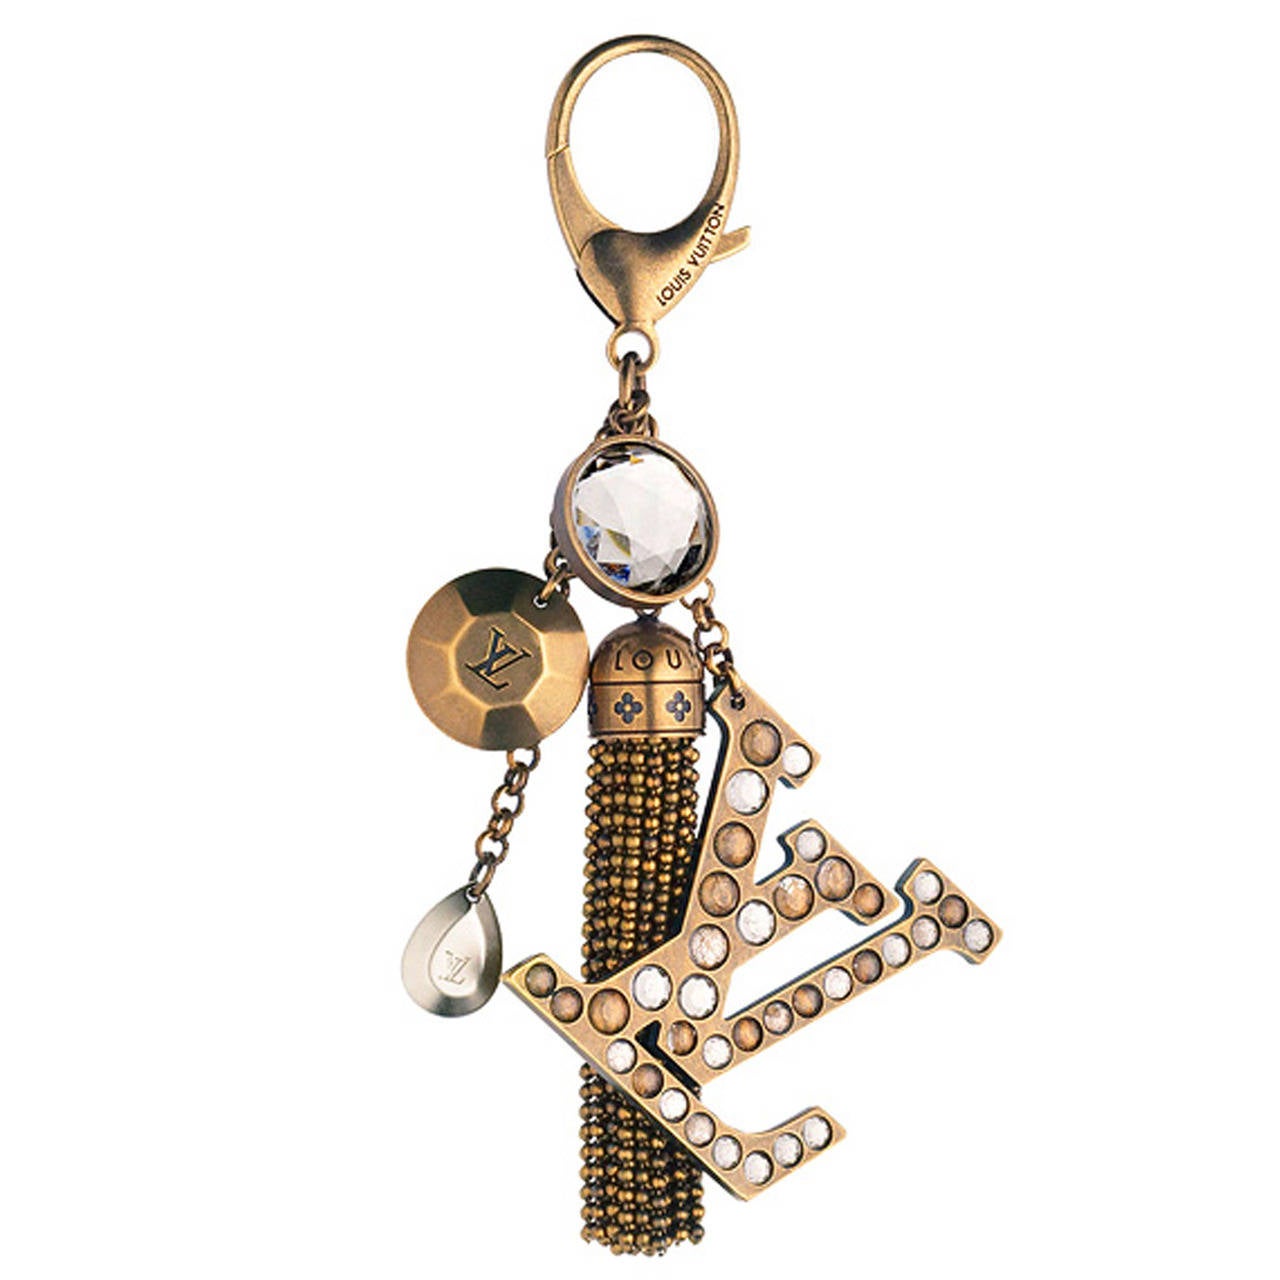 Louis Vuitton Caprice Key Ring /  bag charm W Crystals and Tassle